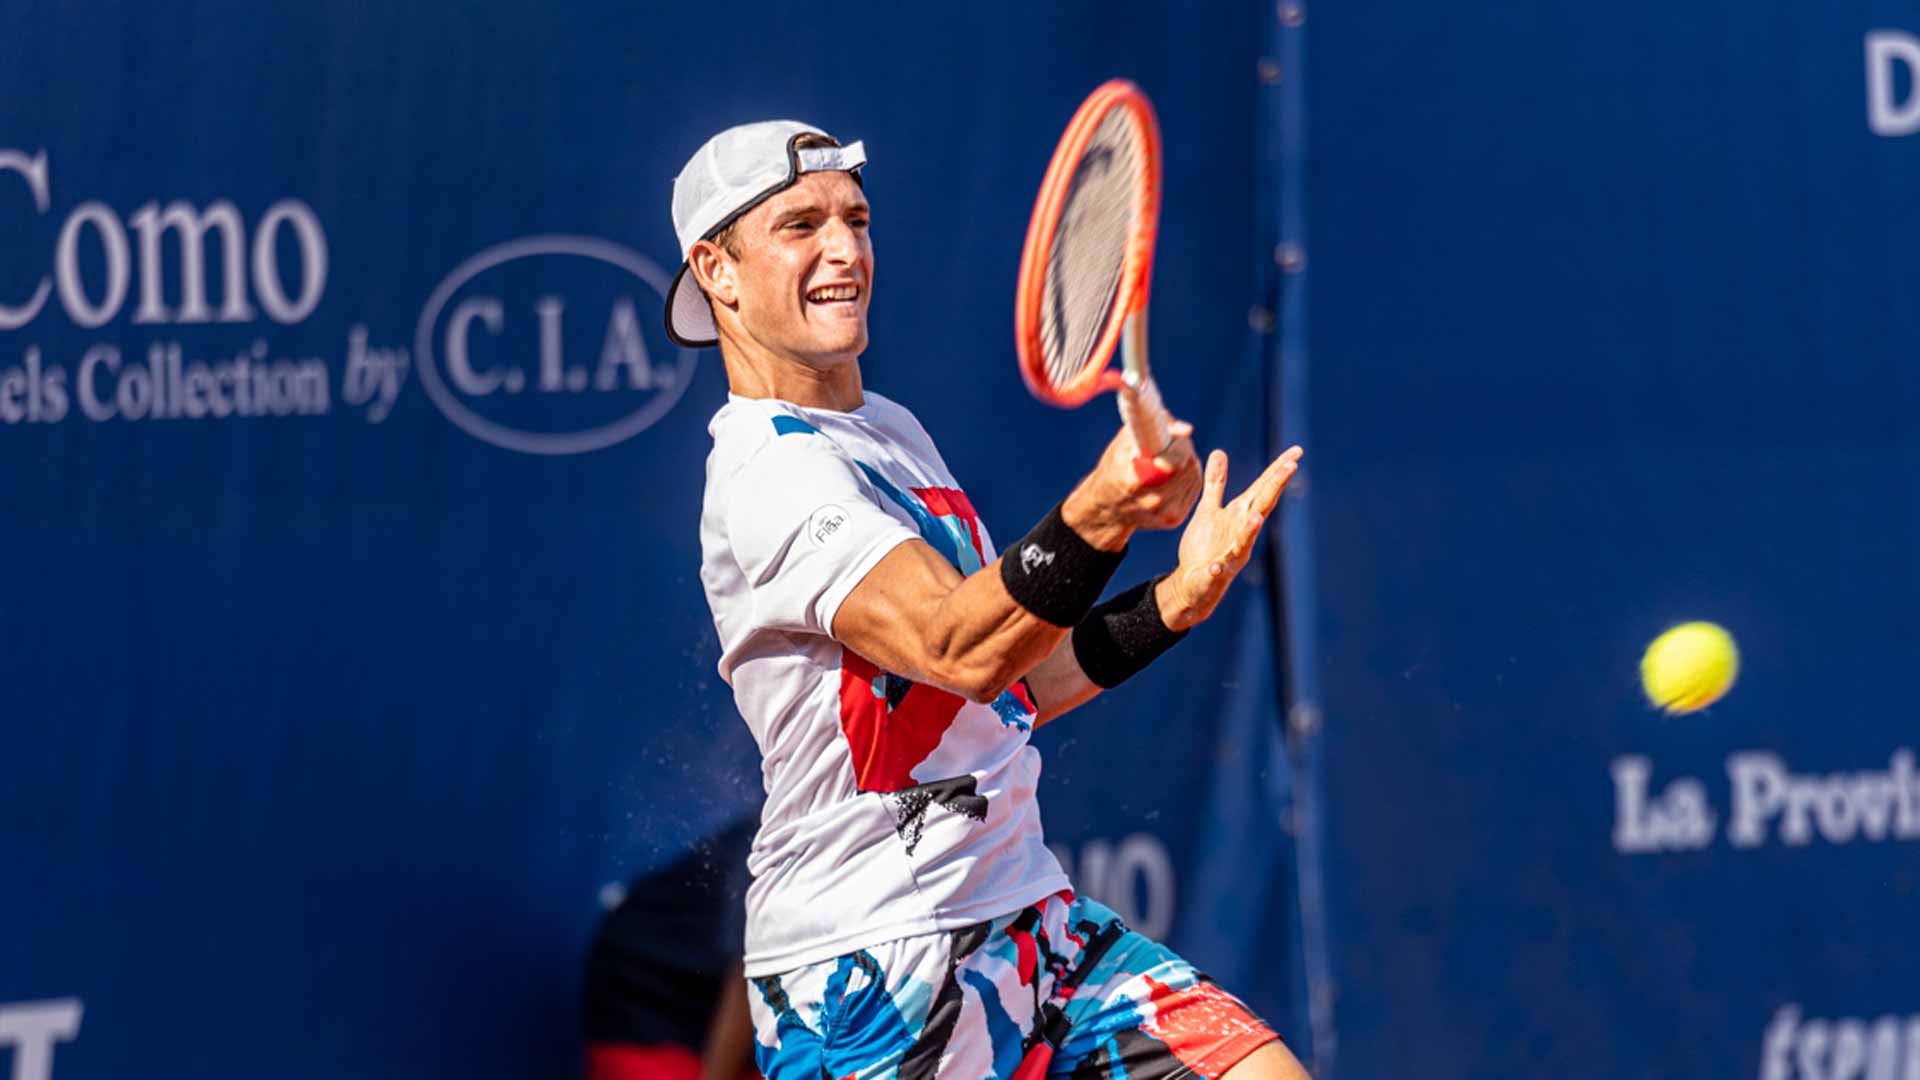 Francesco Passaro is the World No. 128 in the Pepperstone ATP Live Rankings.